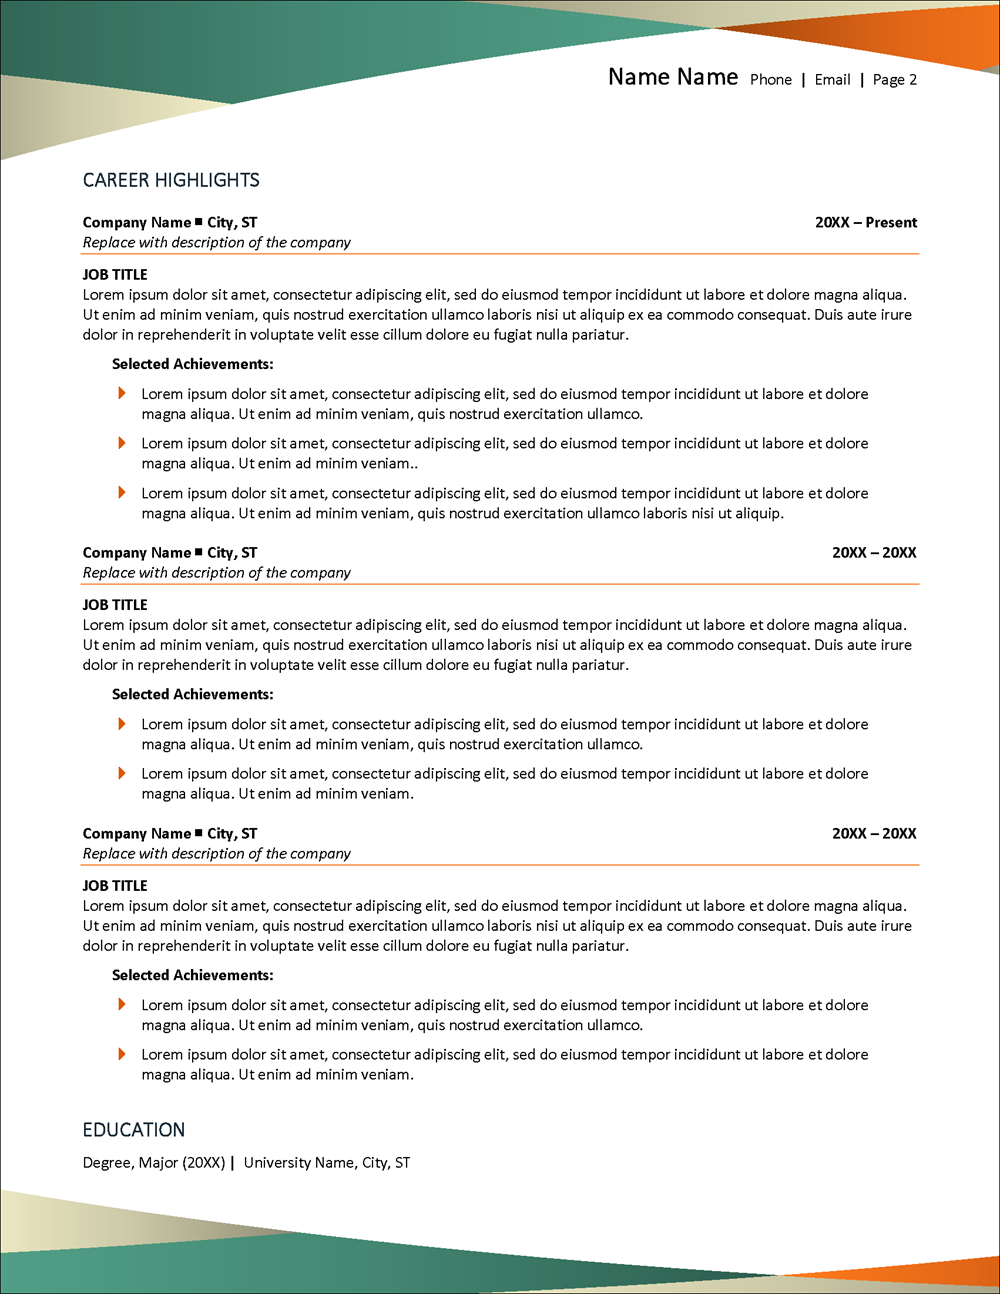 Functional Resume Template Page 2